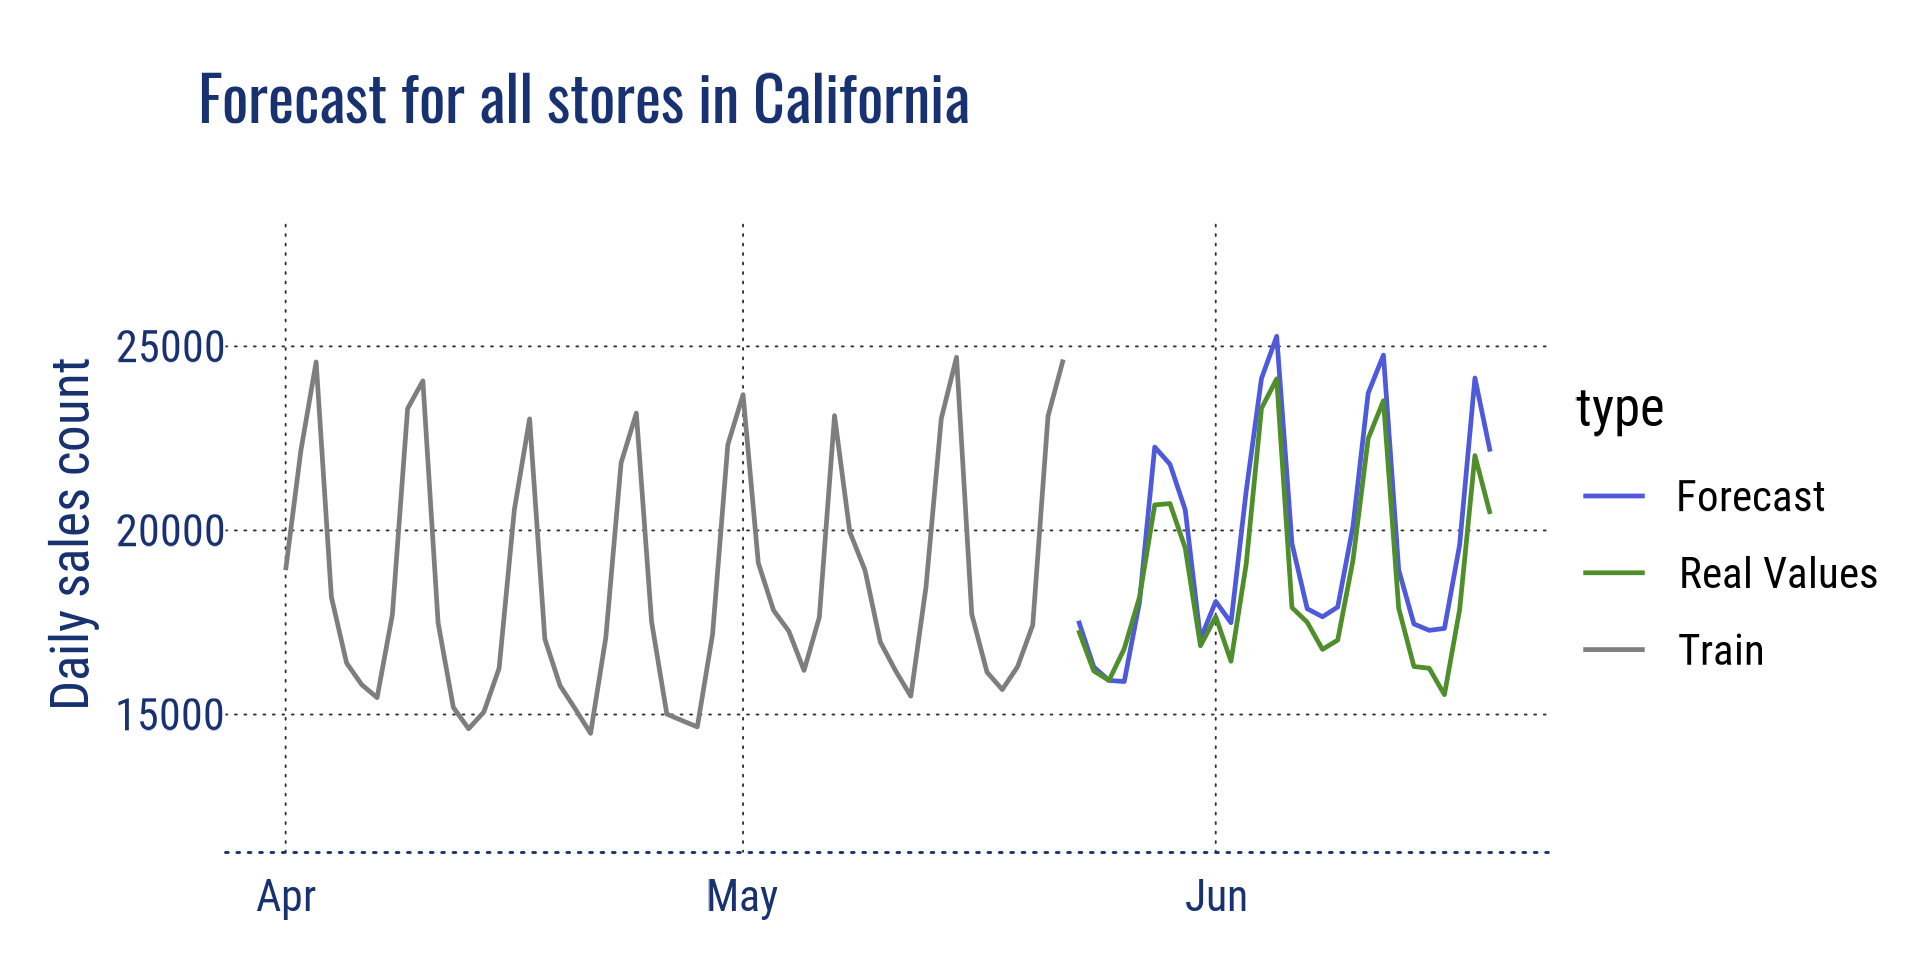 Forecast for all stores in CA